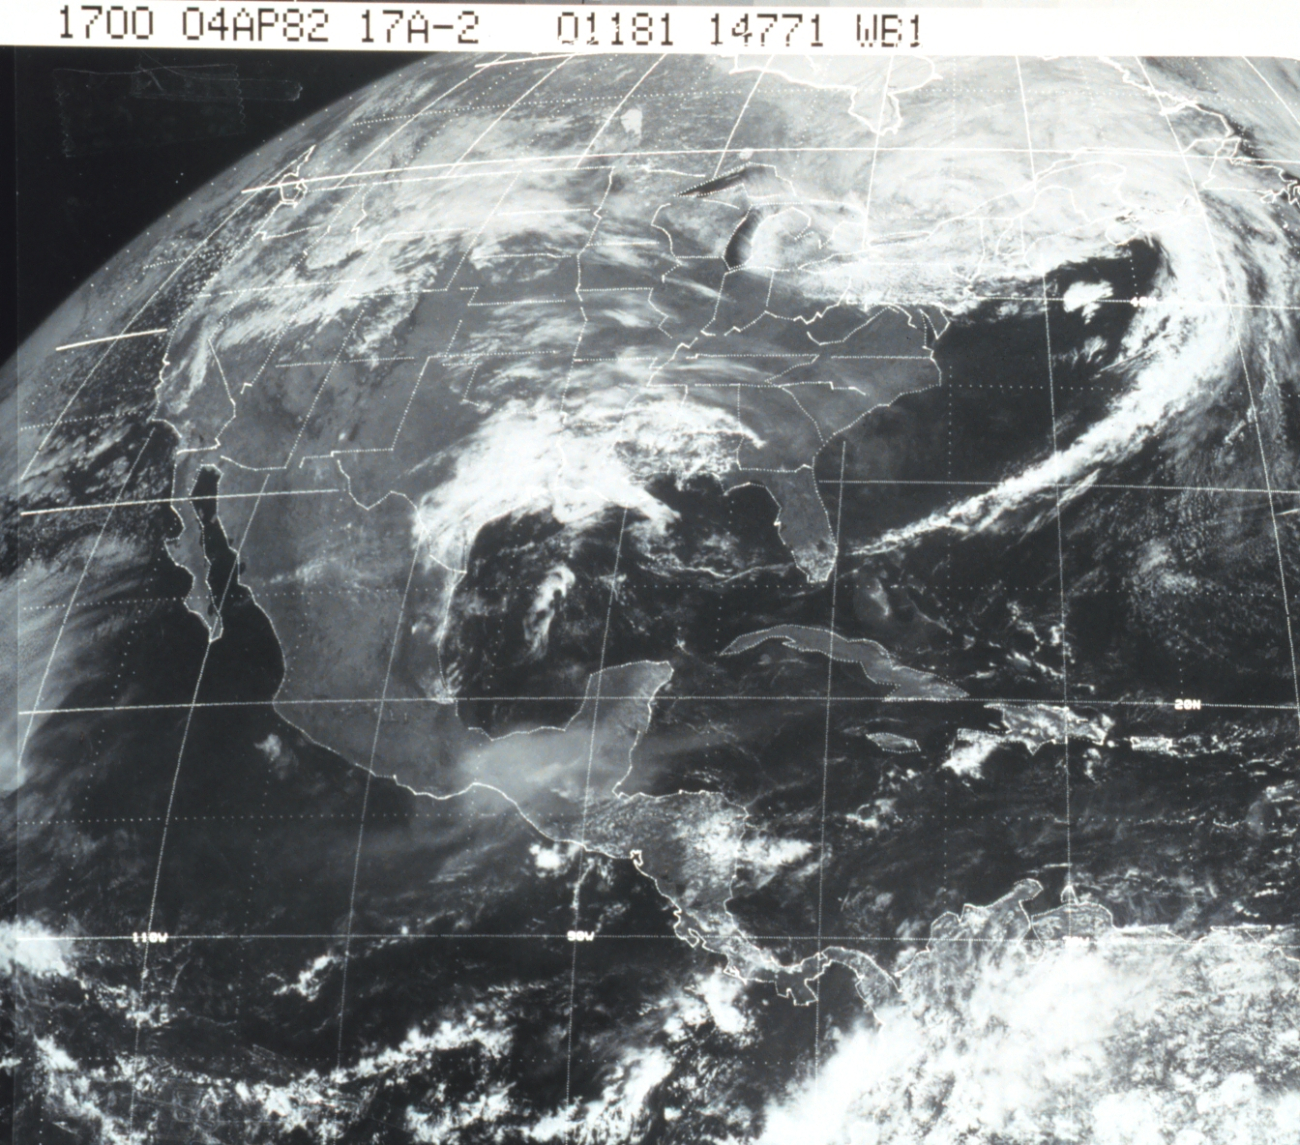 GOES image of North America with storm system over southern states and frontalsystem off the East Coast